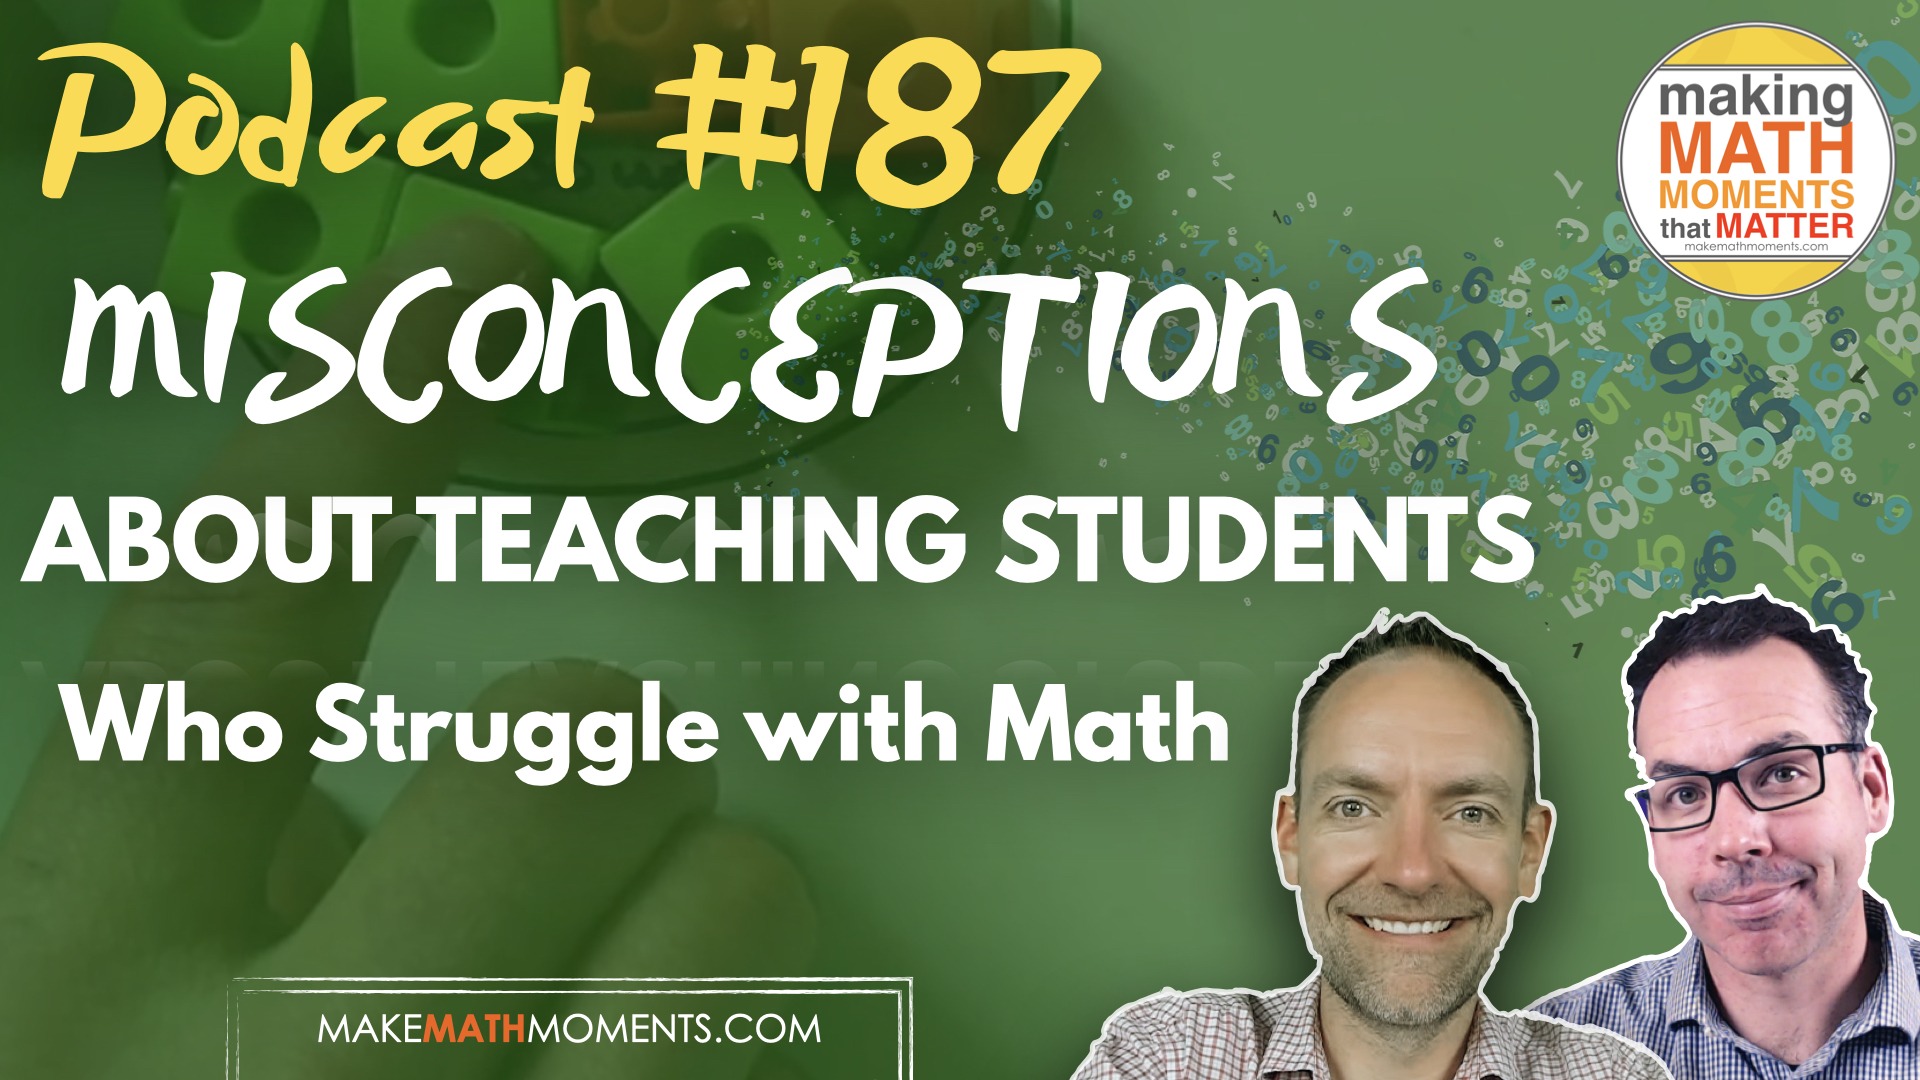 Episode 187: Misconceptions About Teaching Students Who Struggle With Math